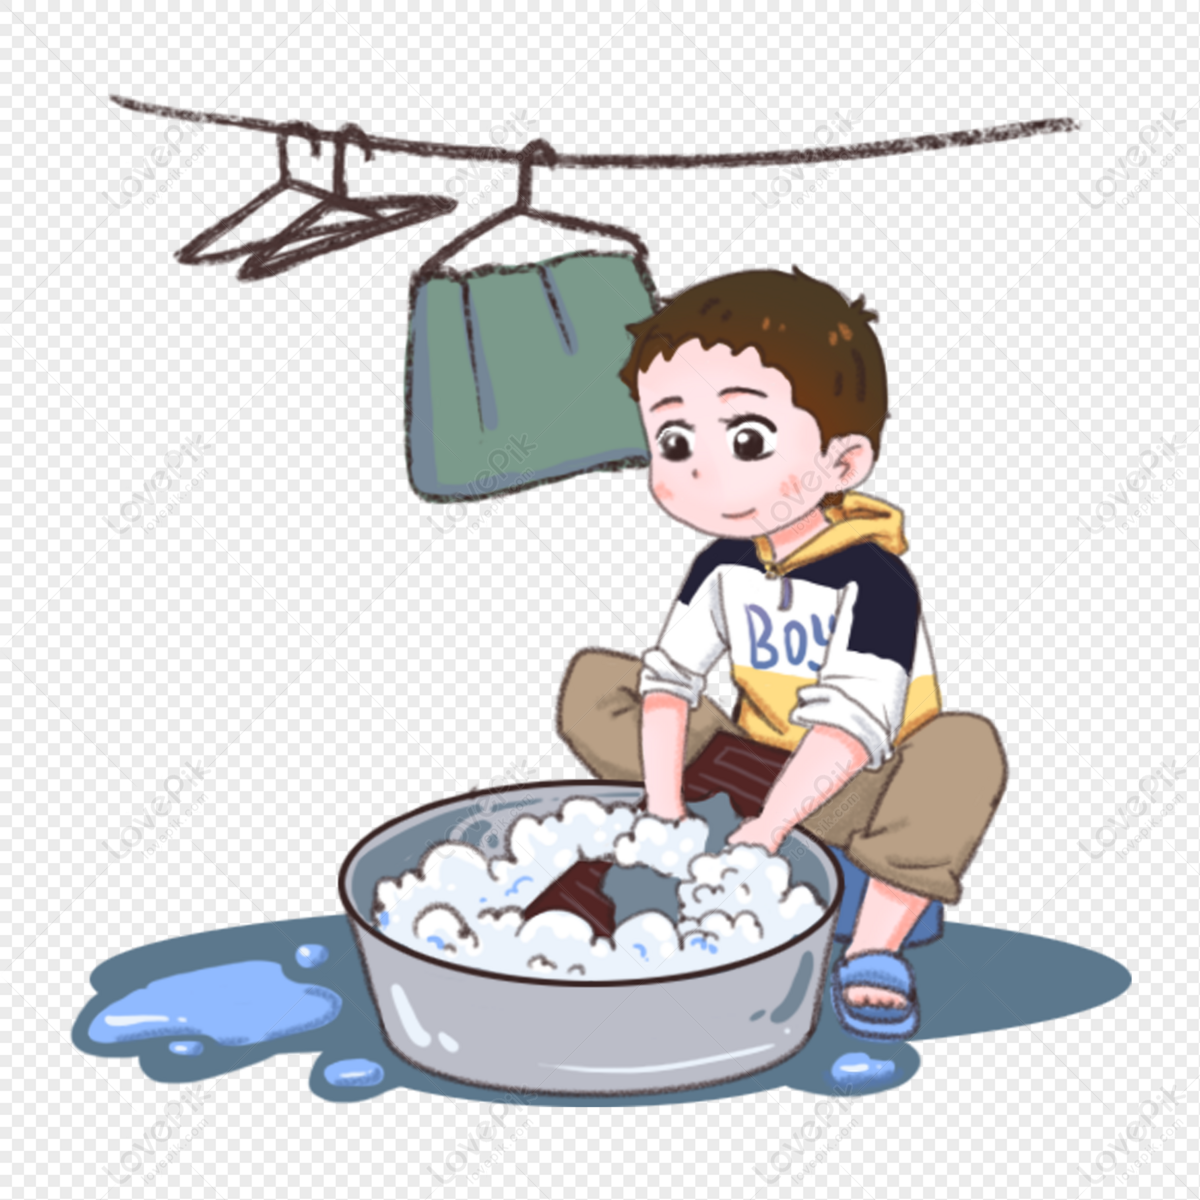 Boy Washing Clothes PNG Picture And Clipart Image For Free Download -  Lovepik | 401727645